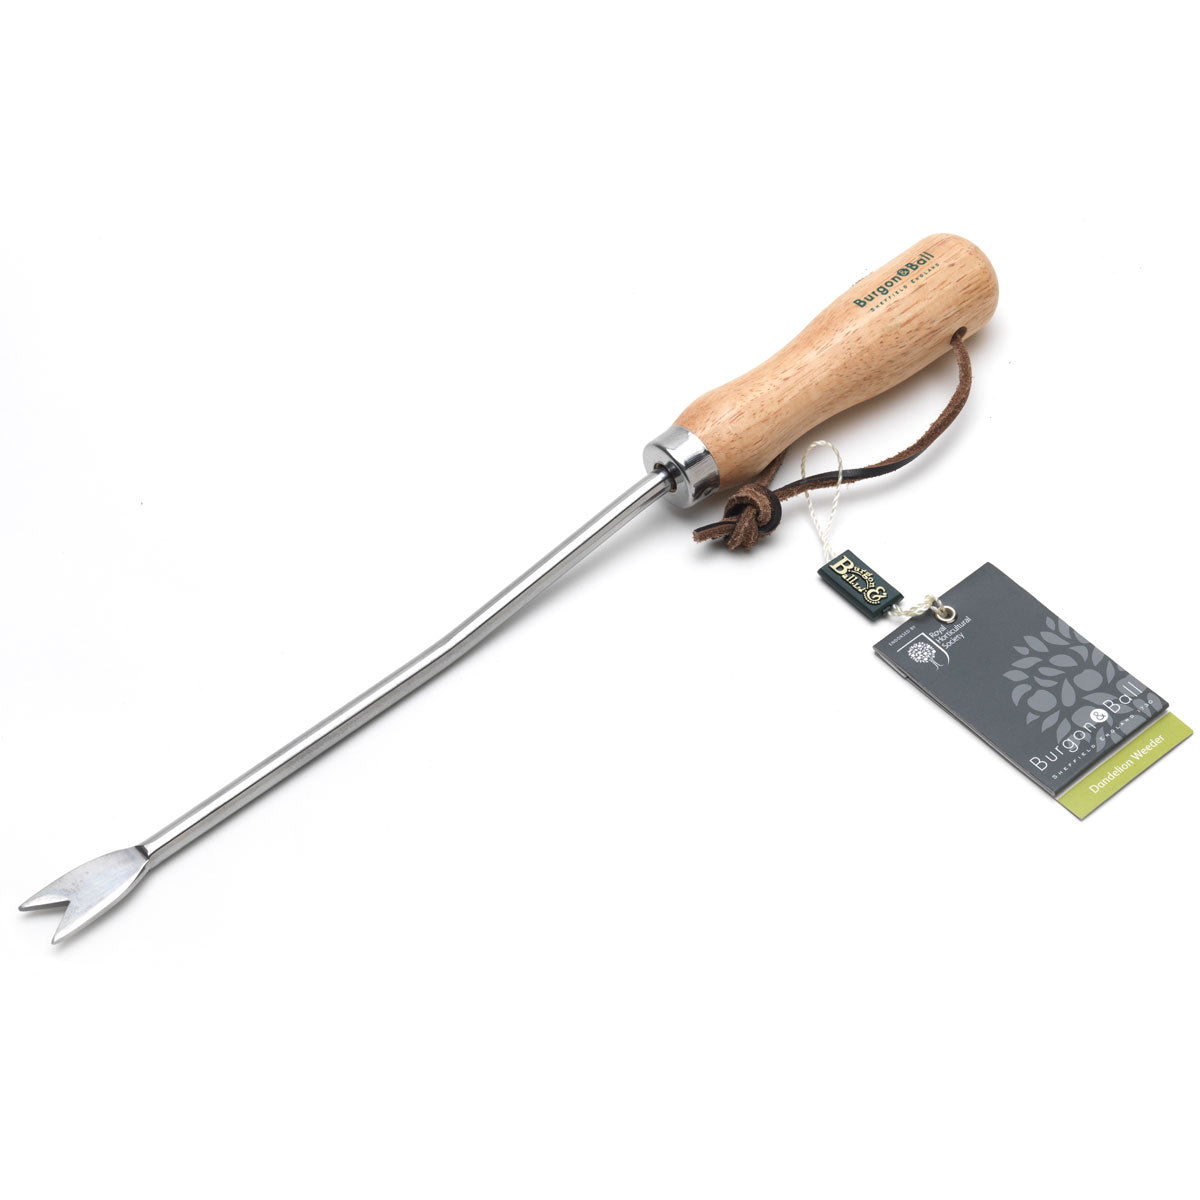 Dandelion Weeder. Stainless steel dandelion removing tool., with wooden handle, from Burgon & Ball.